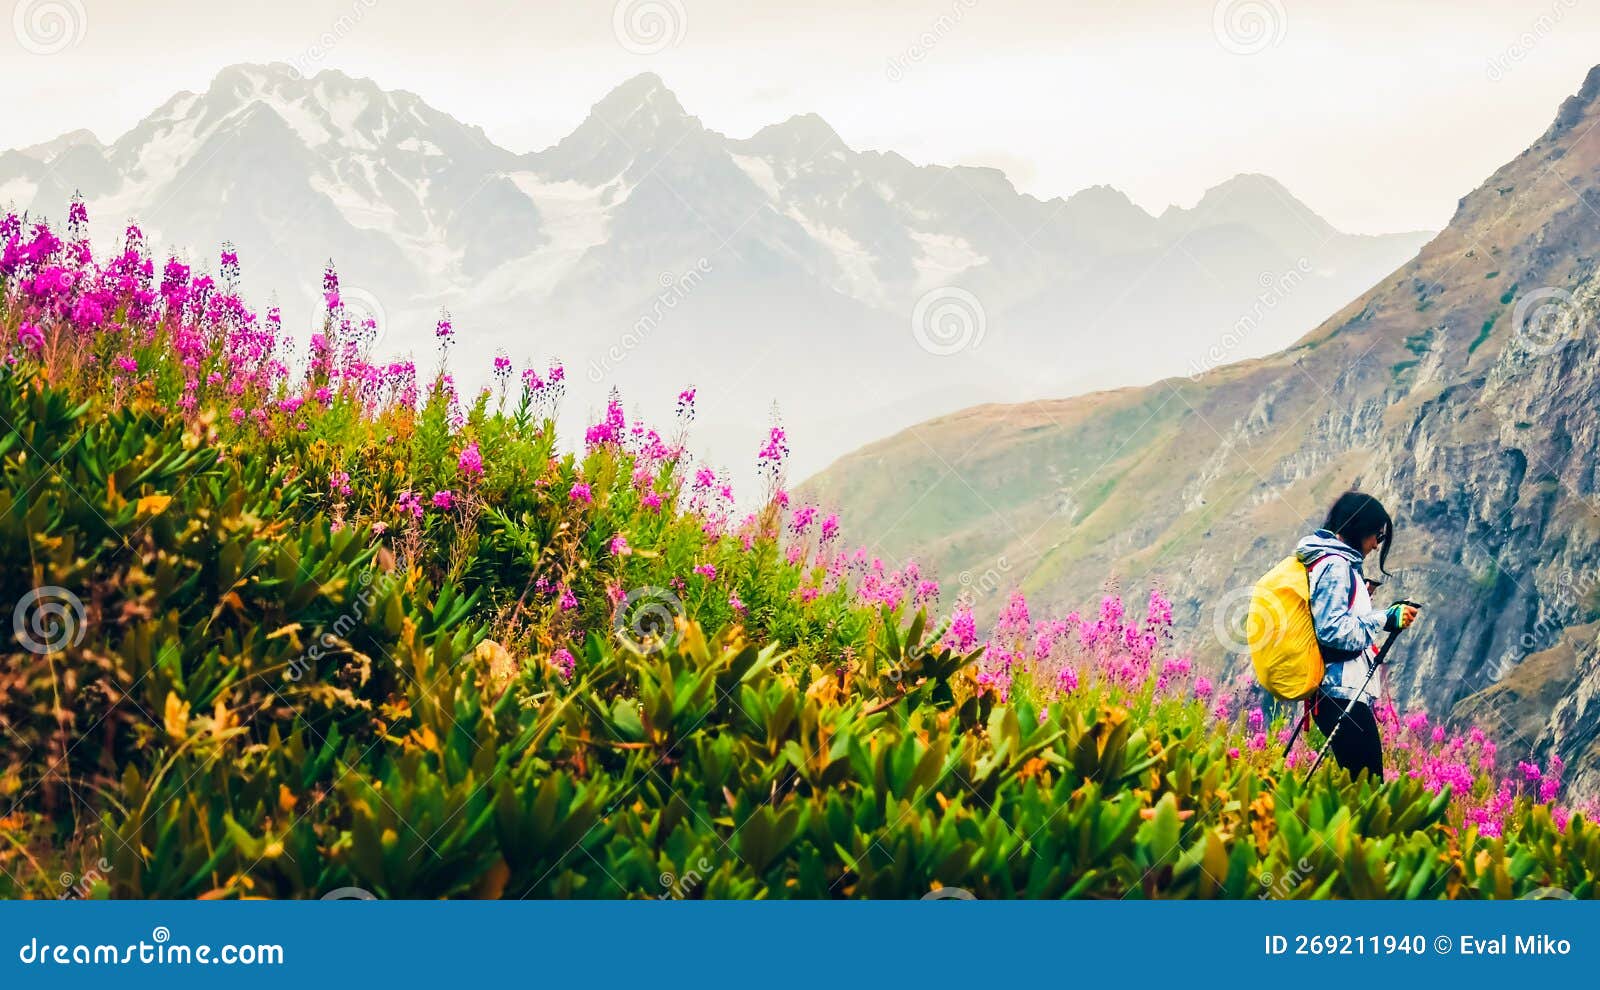 female hiker with nordic walk pols hike downhill in green caucasus mountains hiking trail in spring nature rainy day.recreational